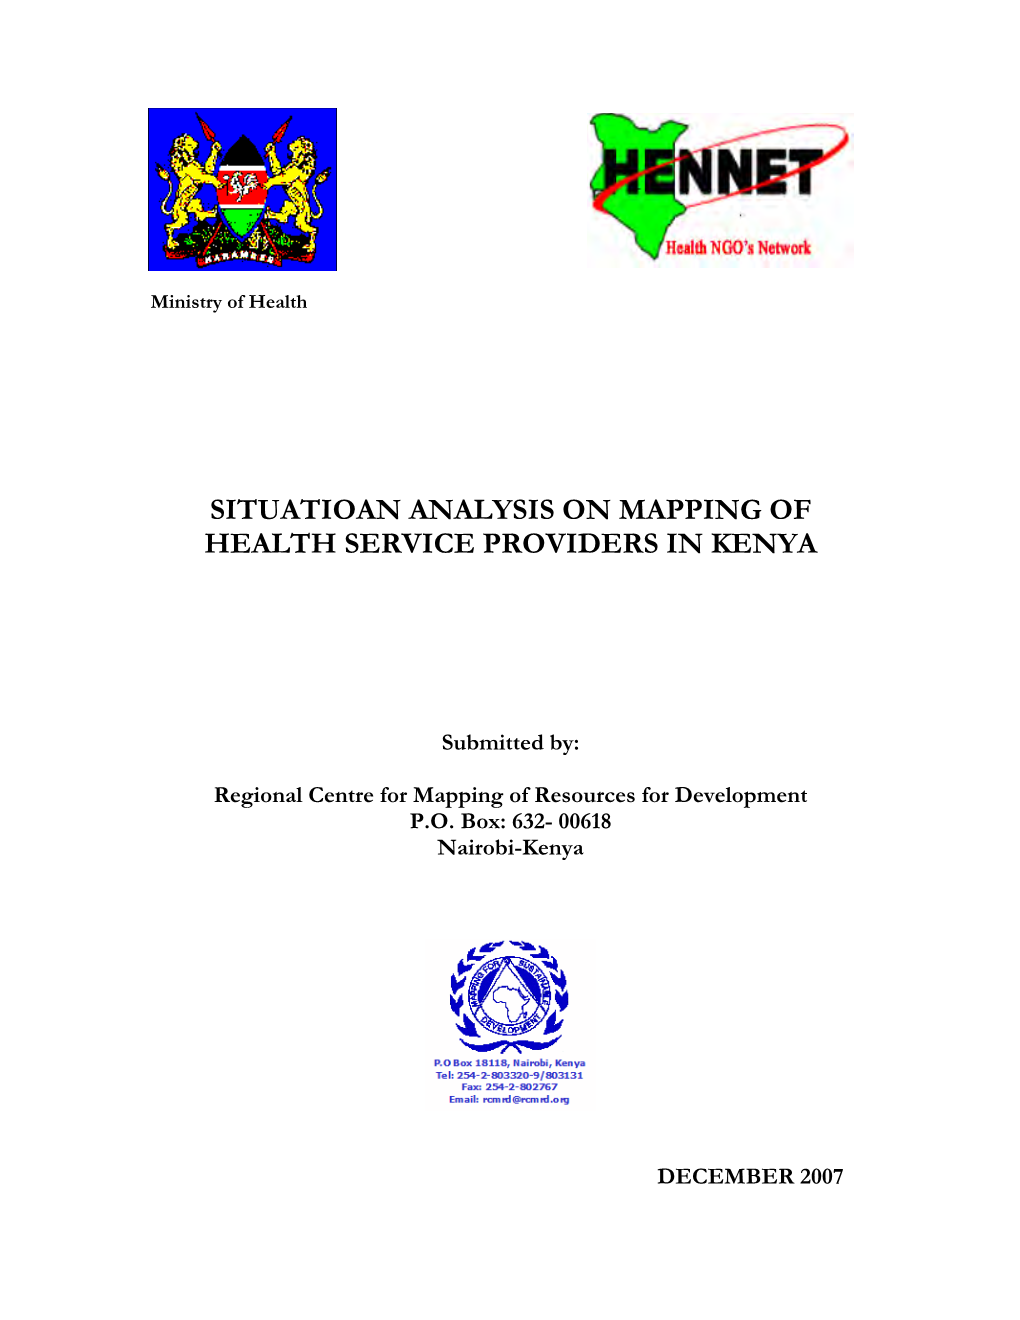 Situatioan Analysis on Mapping of Health Service Providers in Kenya